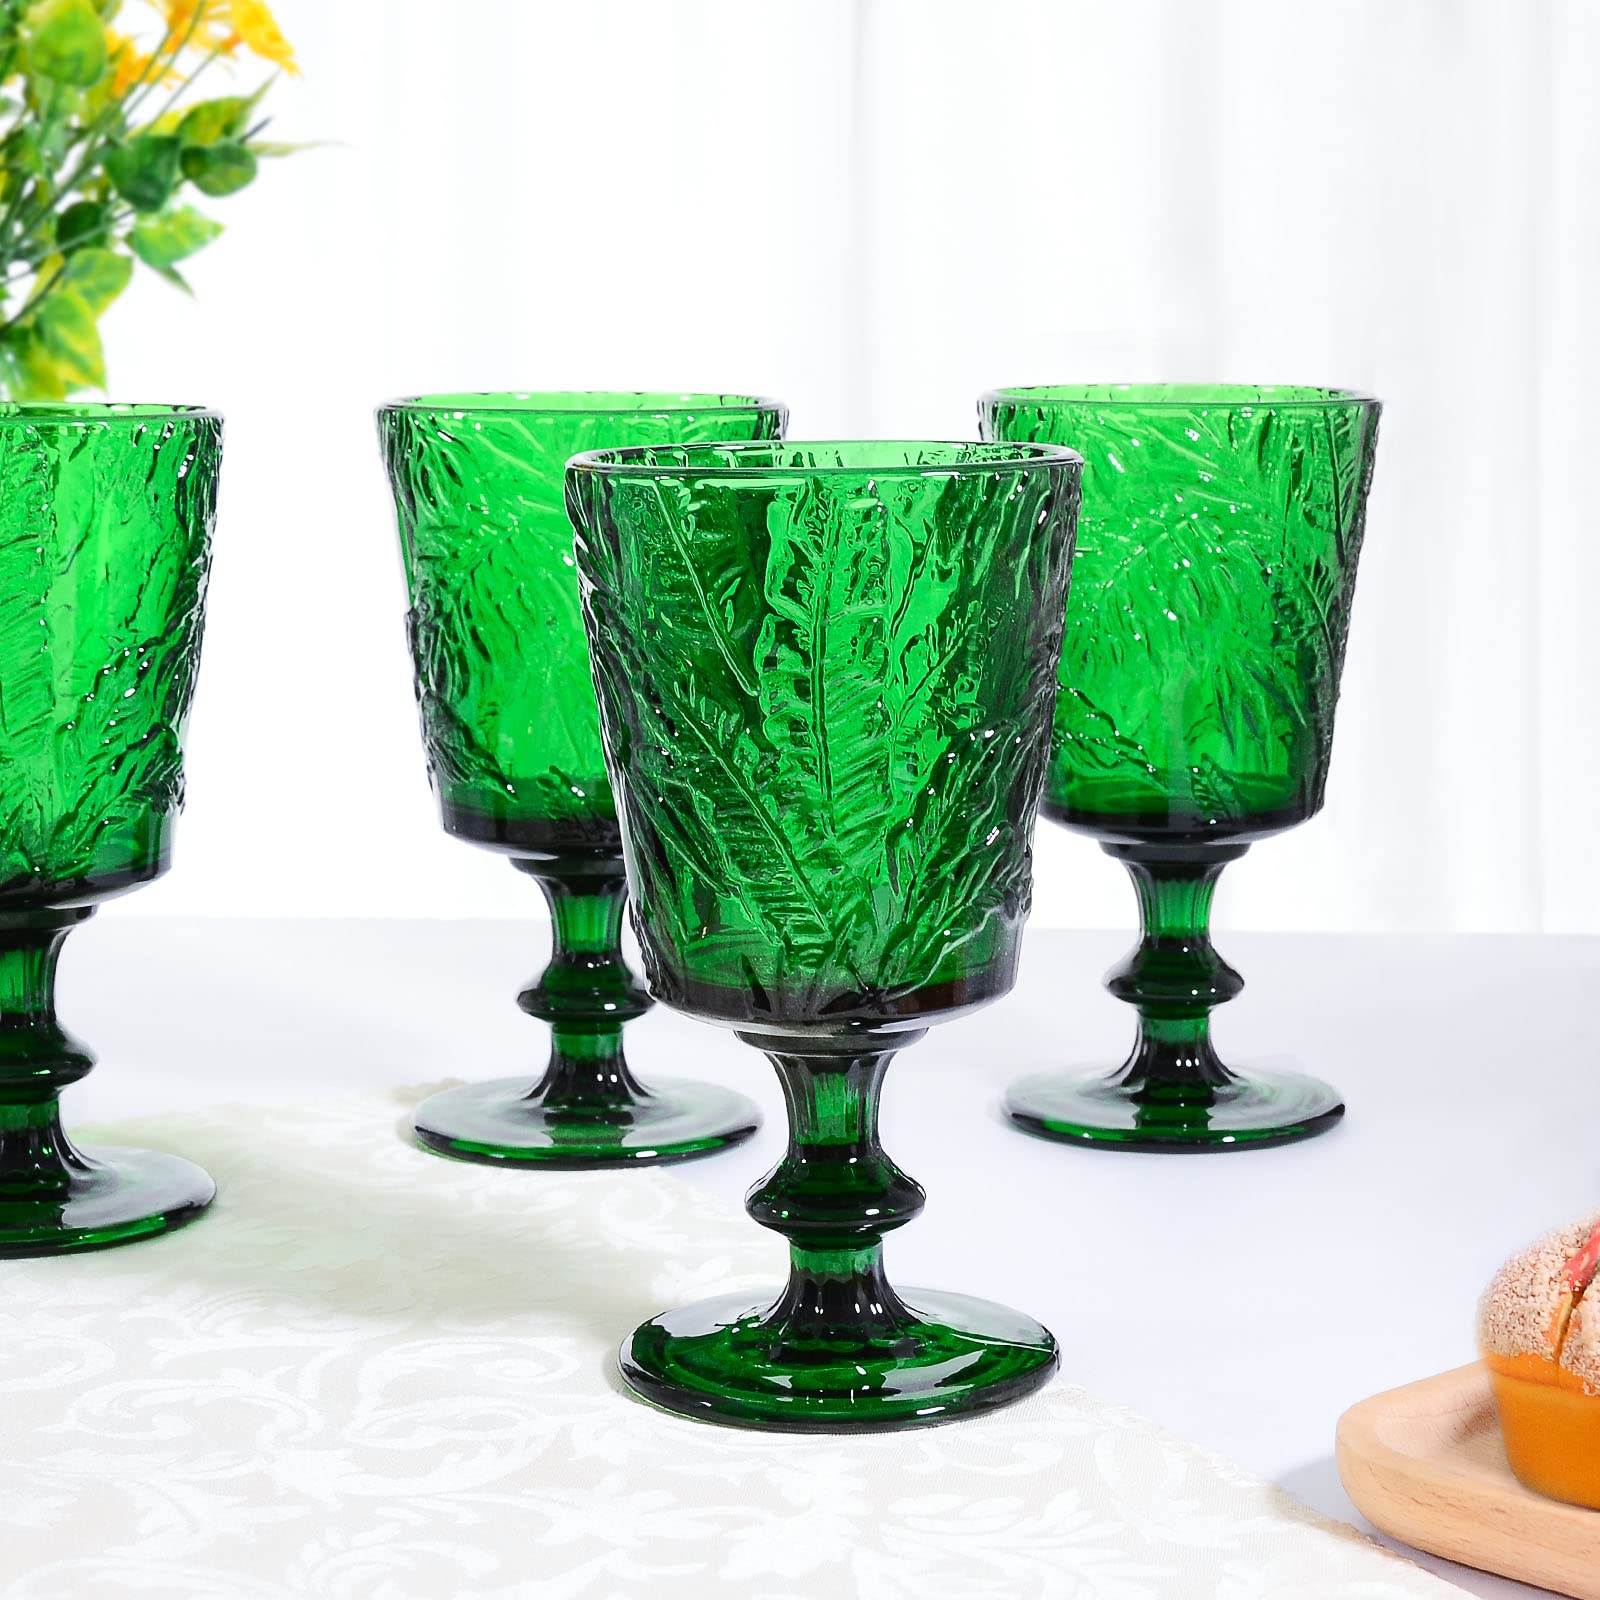 SOUJOY Set of 4 Colored Wine Glass Goblet, 12oz Handmade Pressed Stemmed Water Cup, Green Vintage Tropical Palm Pattern Embossed Drinkware for Party, Wedding